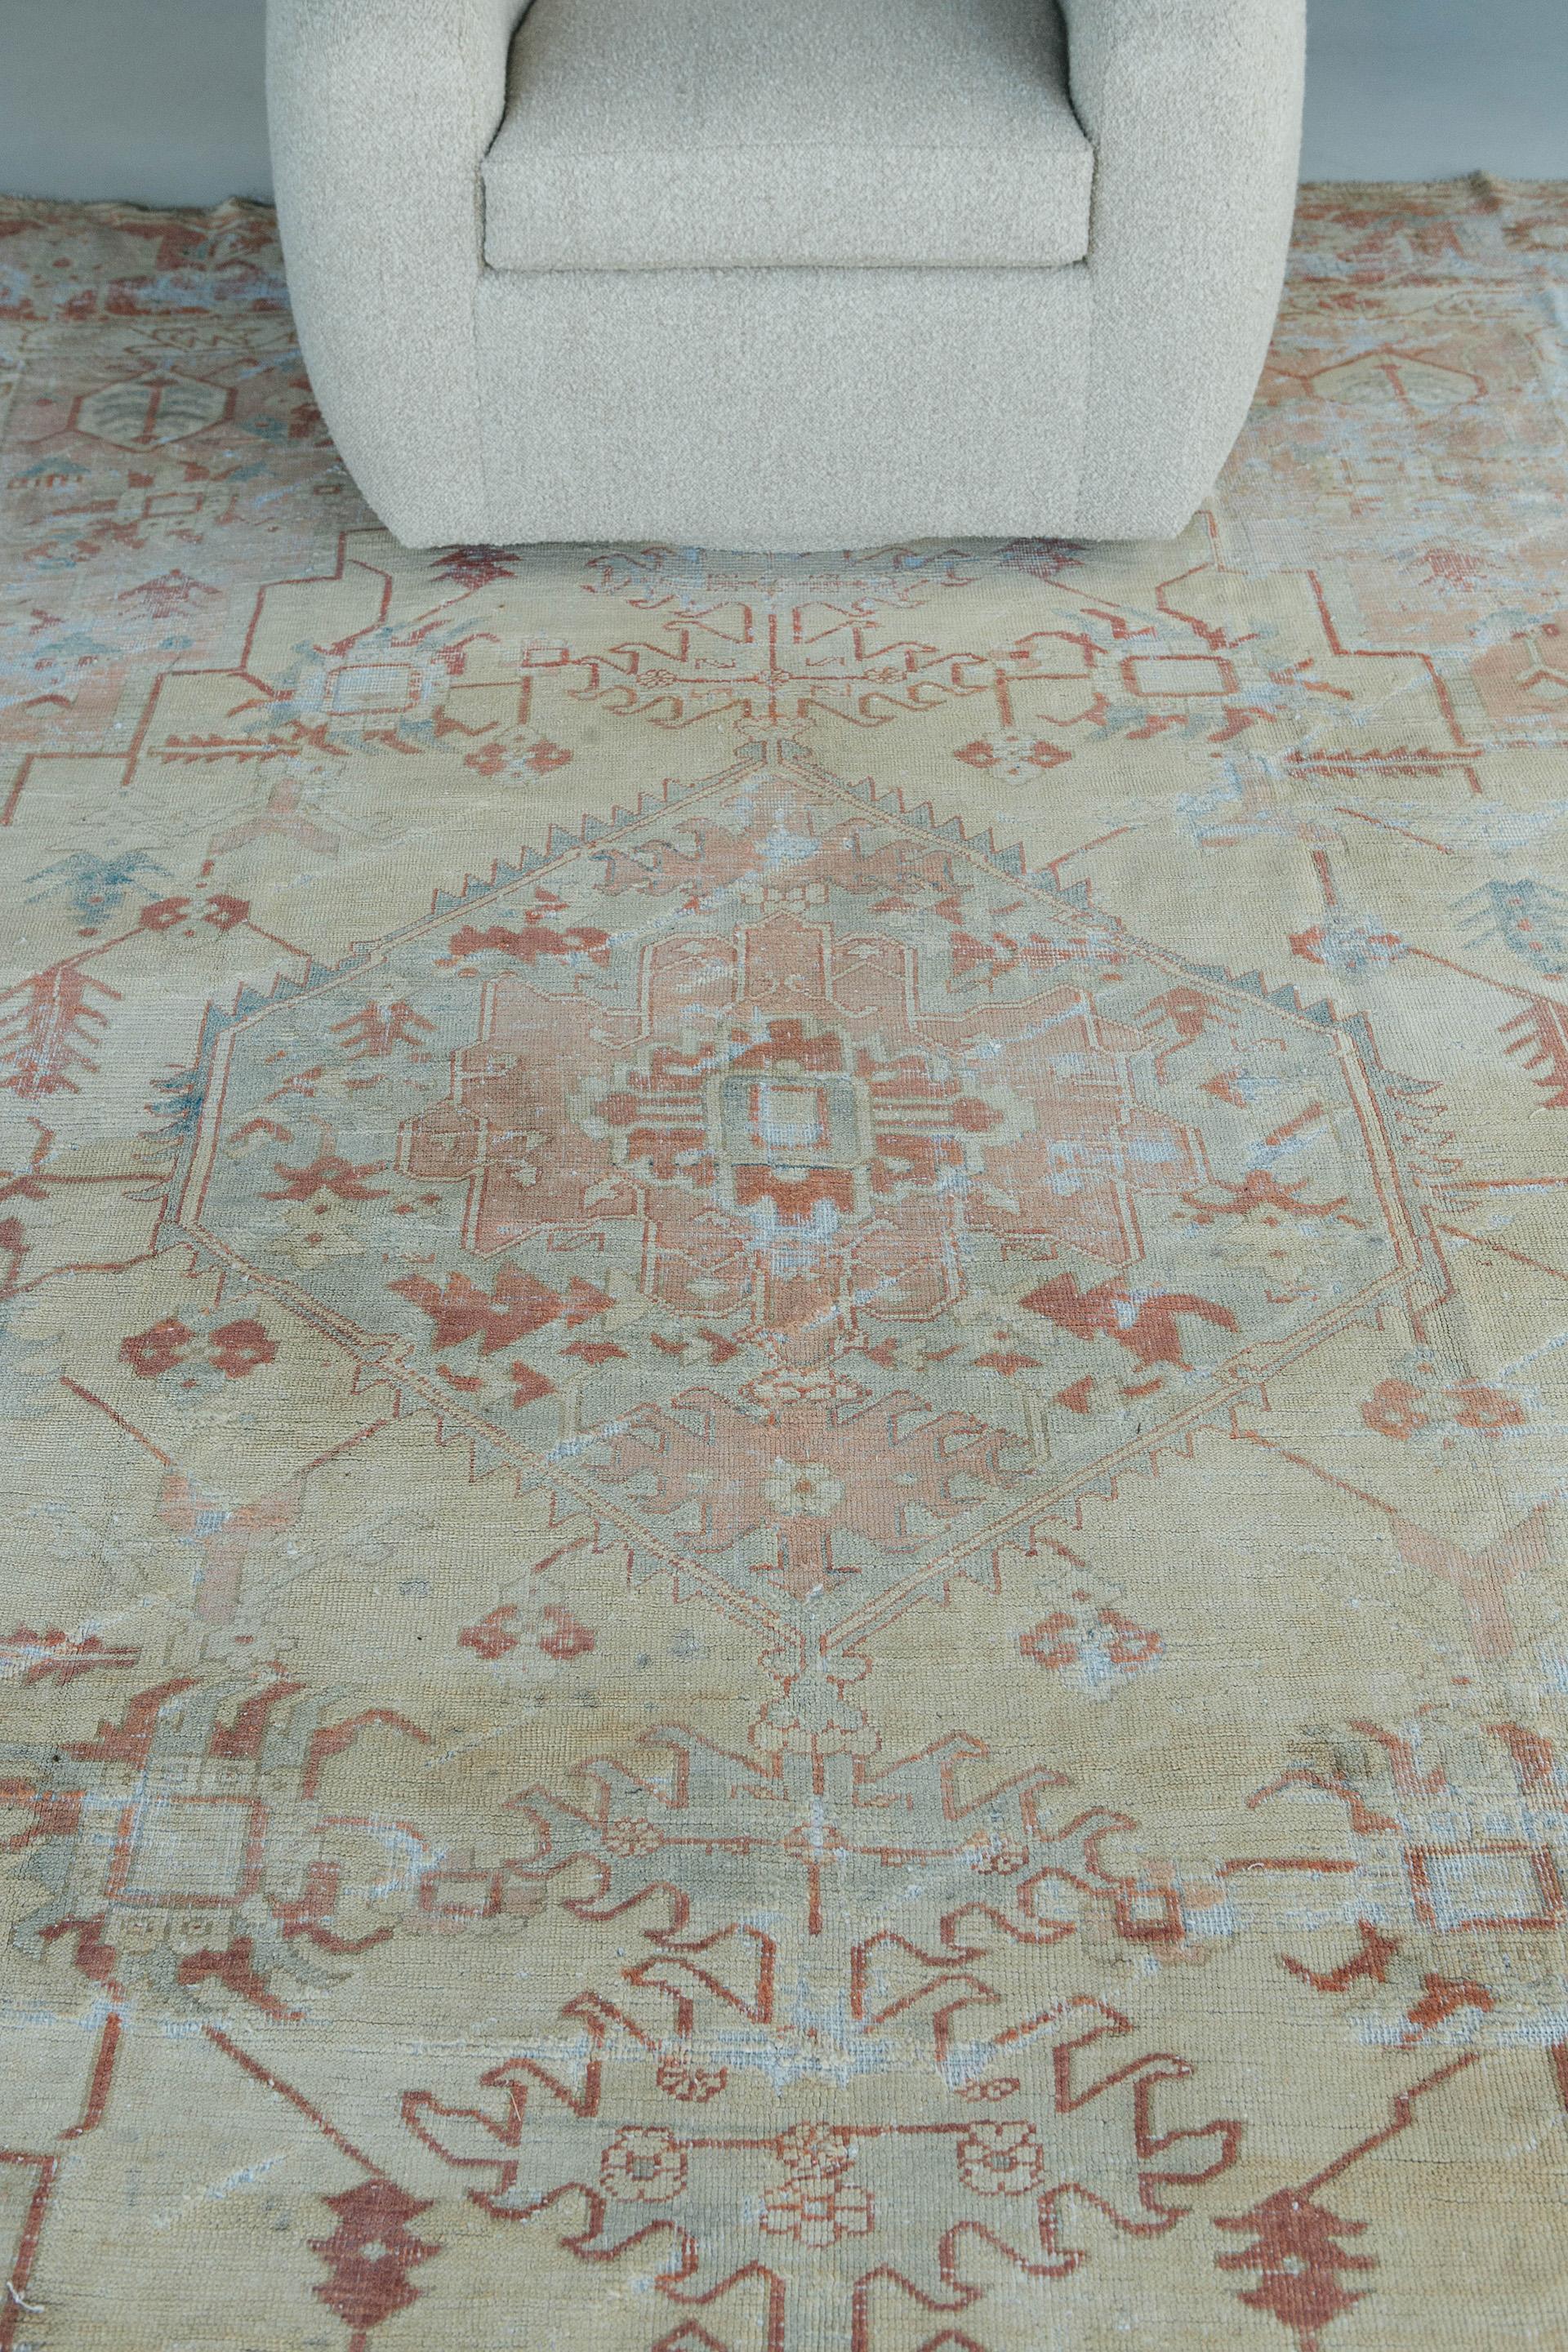 Pale gold, rose and coral with soft celadon accents set a quietly sunny mood in this ethereally-aged antique Serapi. A highly stylized geometric center medallion anchors the rug and is surrounded by numerous geomorphic floral patterns. Stepped